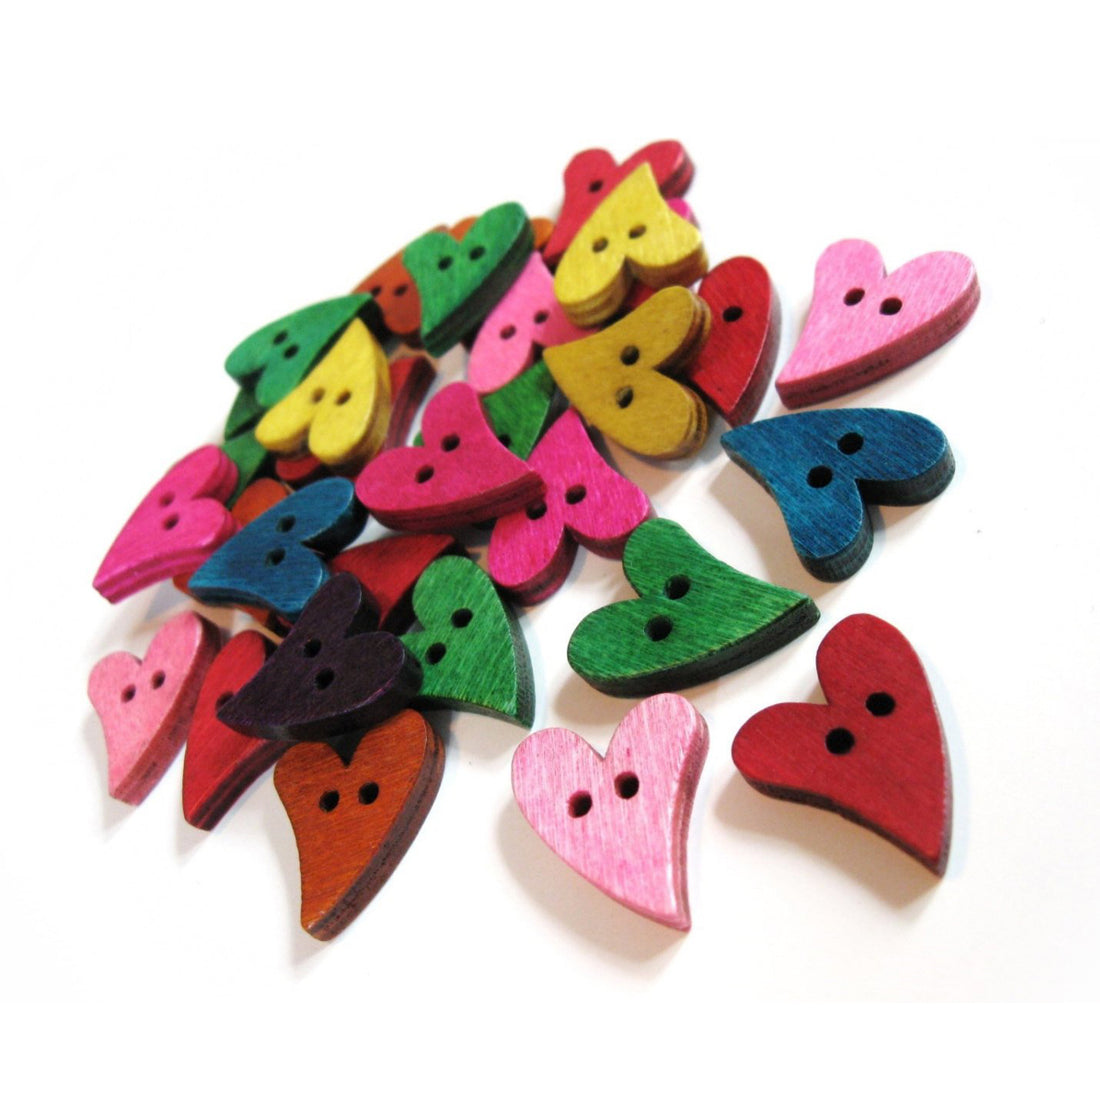 Wood sewing buttons 20mm - Hearts shapes 25 Mixed Colors Buttons